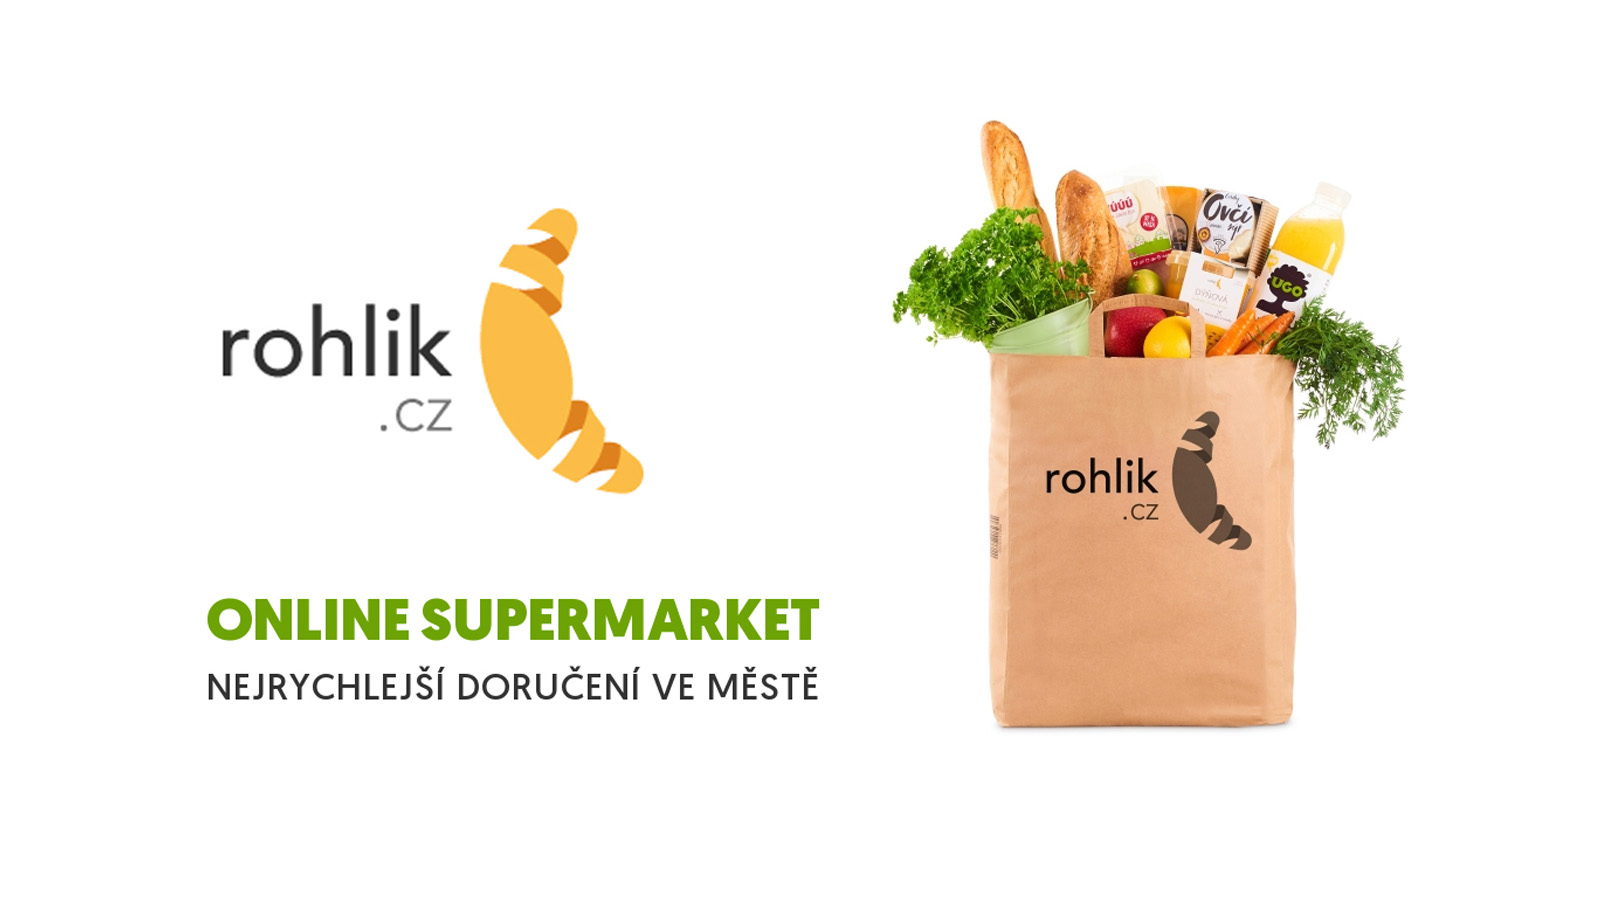 Rohlík.cz - Welcome to our customer service